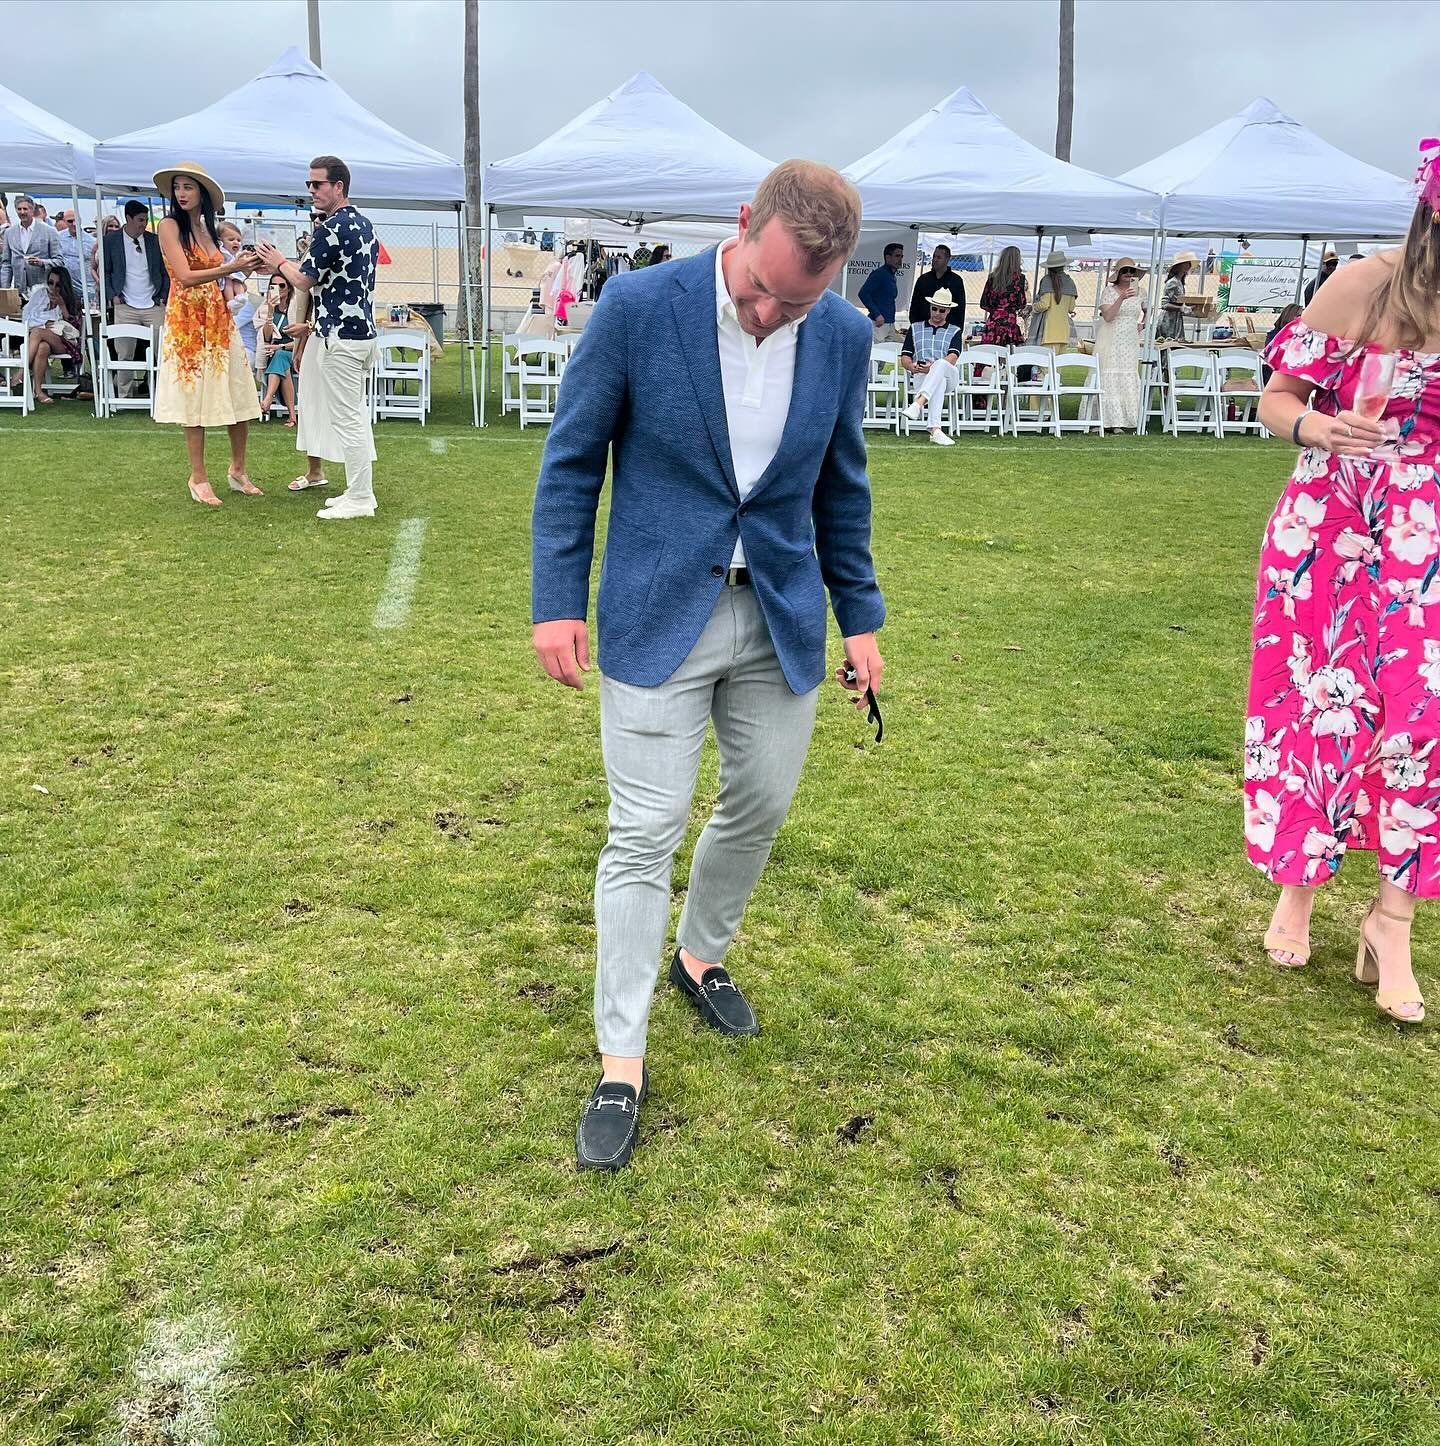 DIVOT STOMP - 

Divot stomp is one of the oldest and most widely known traditions of polo. At halftime, spectators are welcomed onto the field to replace the mounds of earth (divots) that are torn up by the horses during the game!